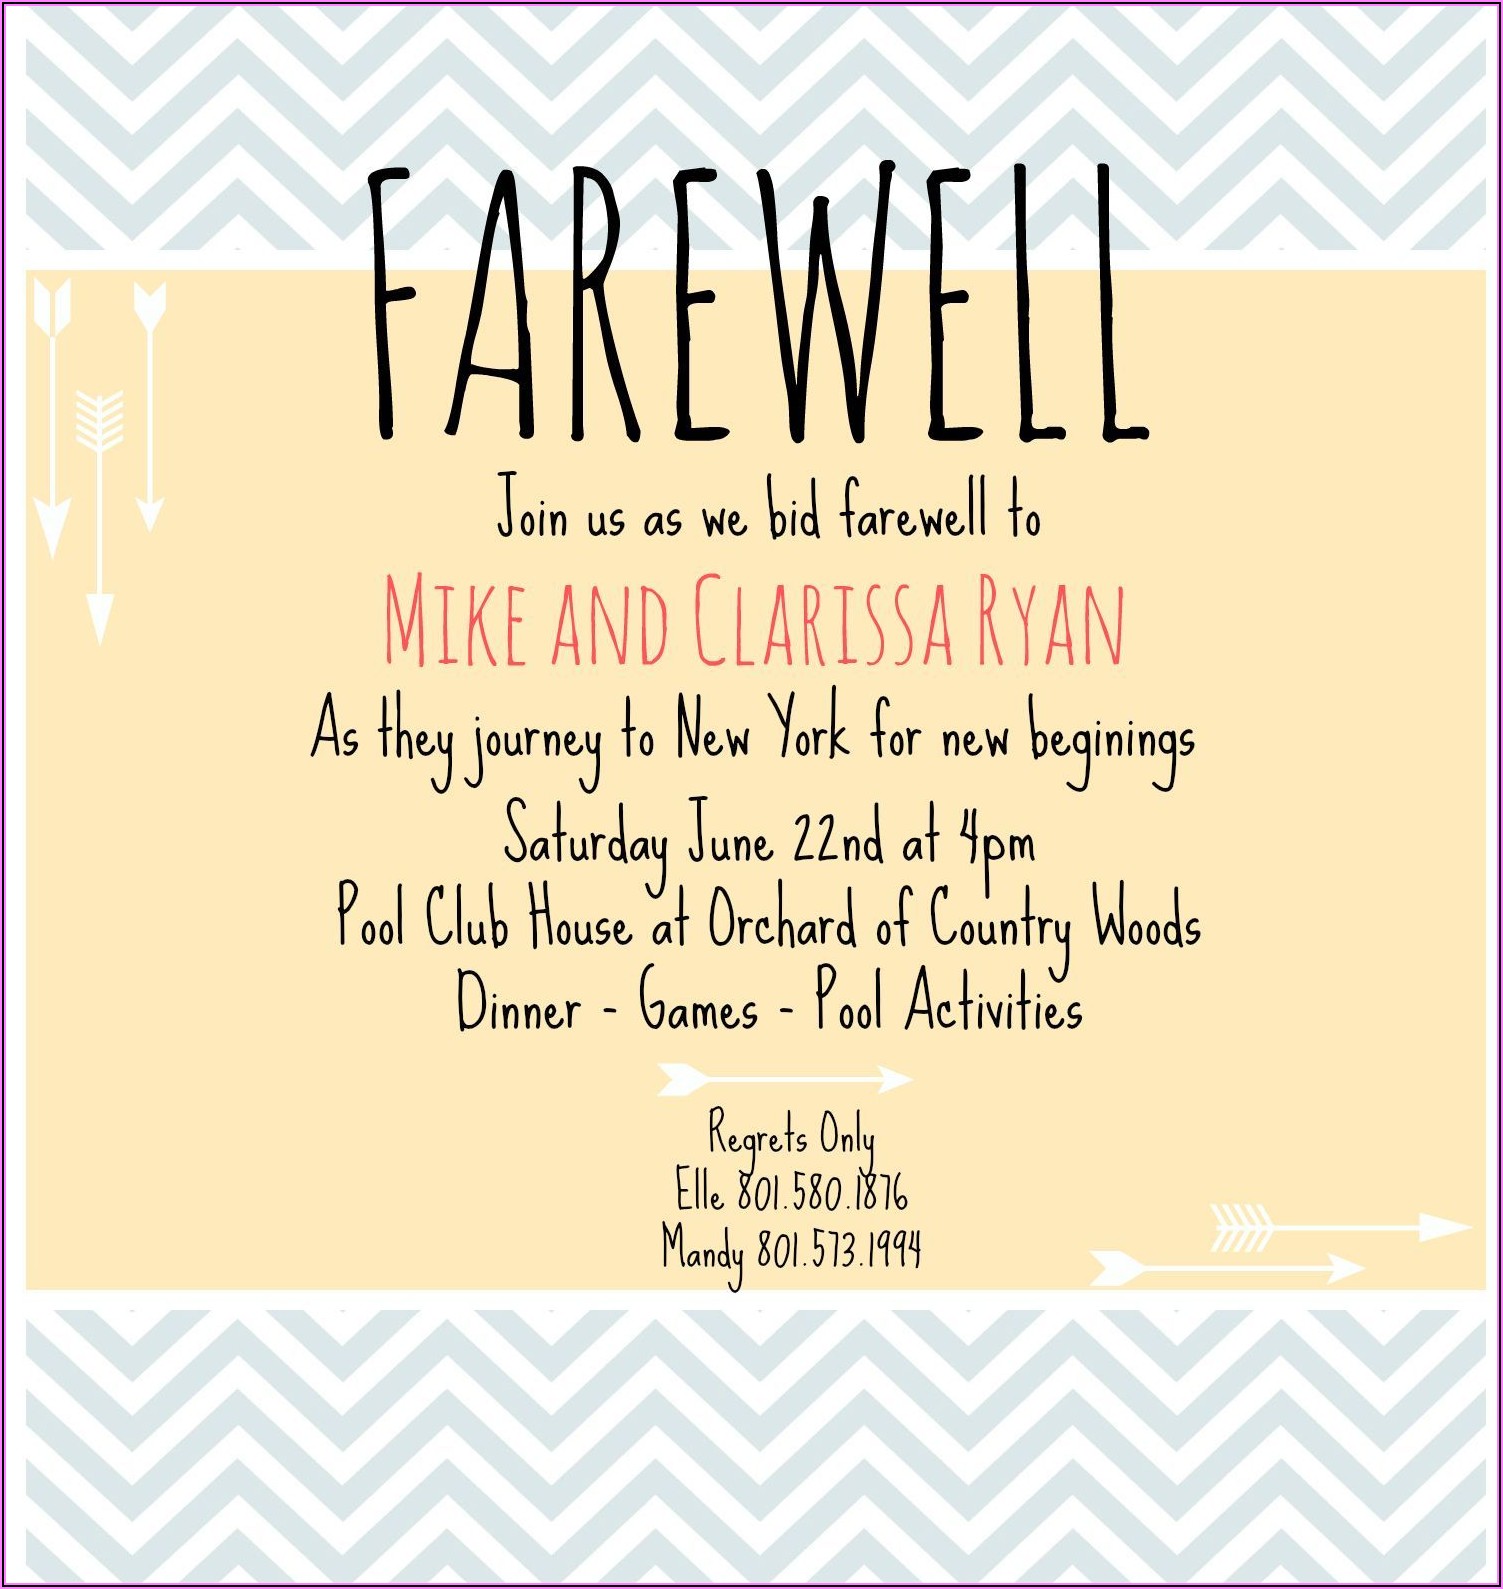 Farewell Lunch Party Invitation Message